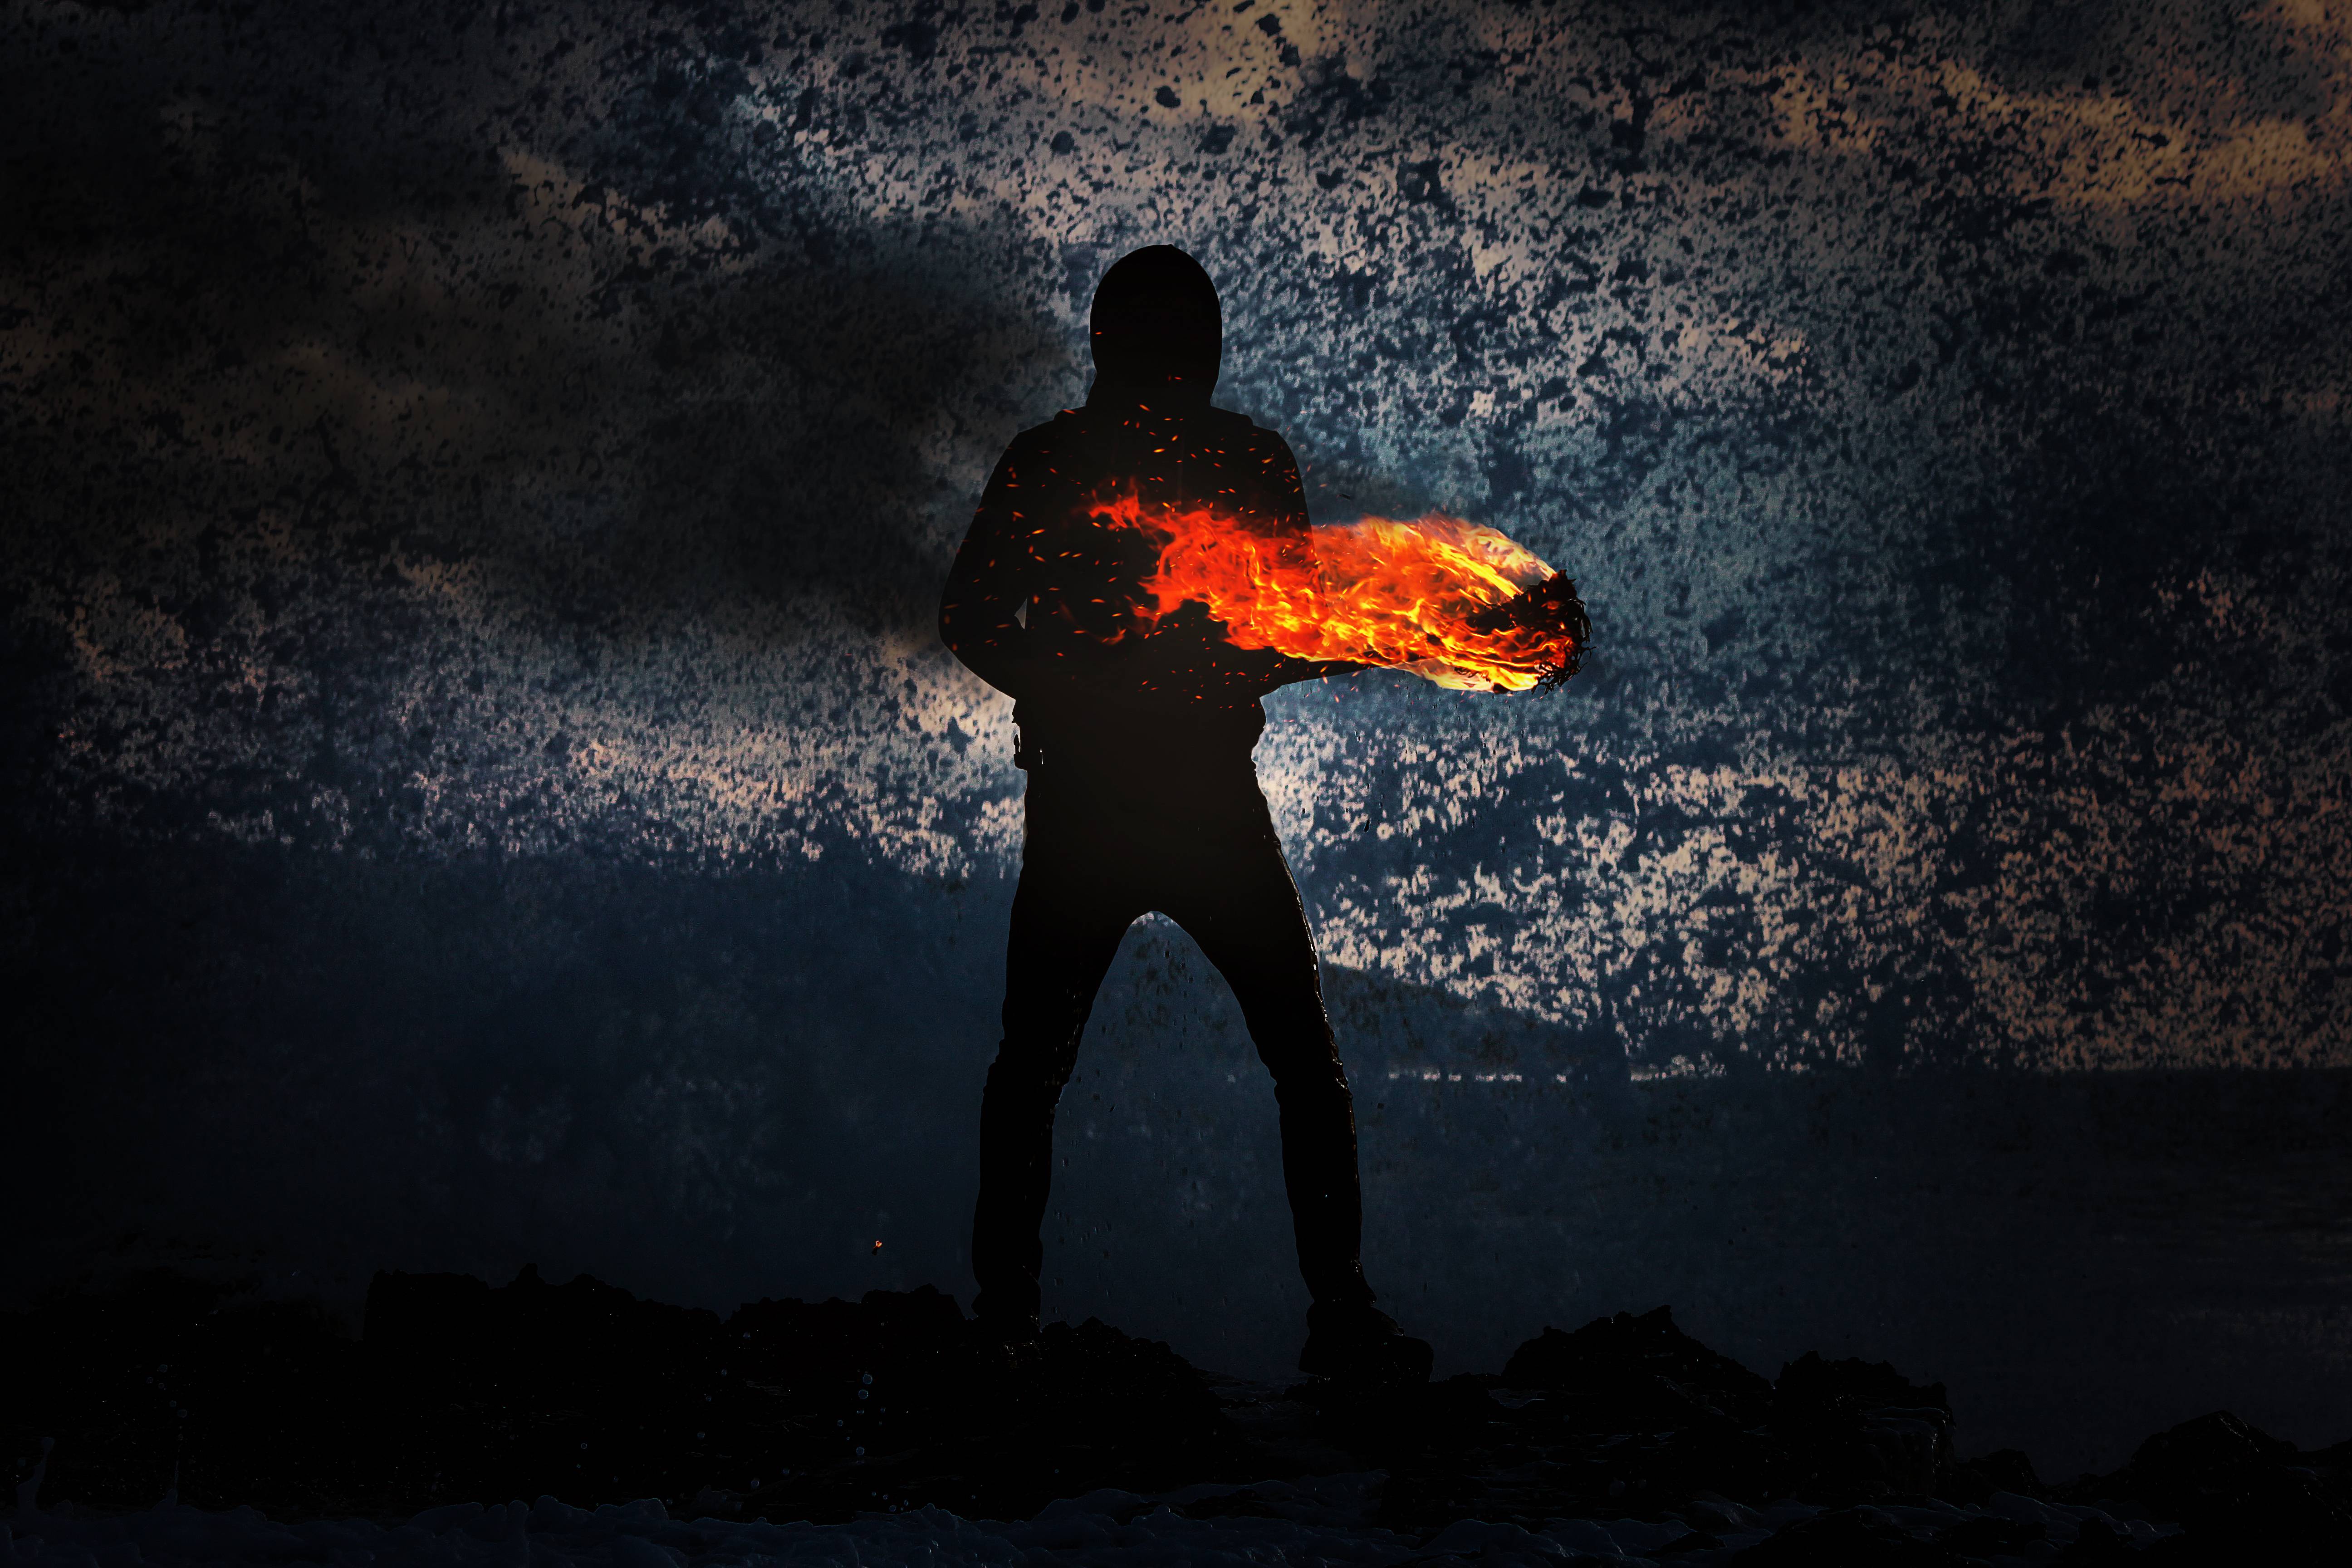 Man With Fire, HD Photography, 4k Wallpaper, Image, Background